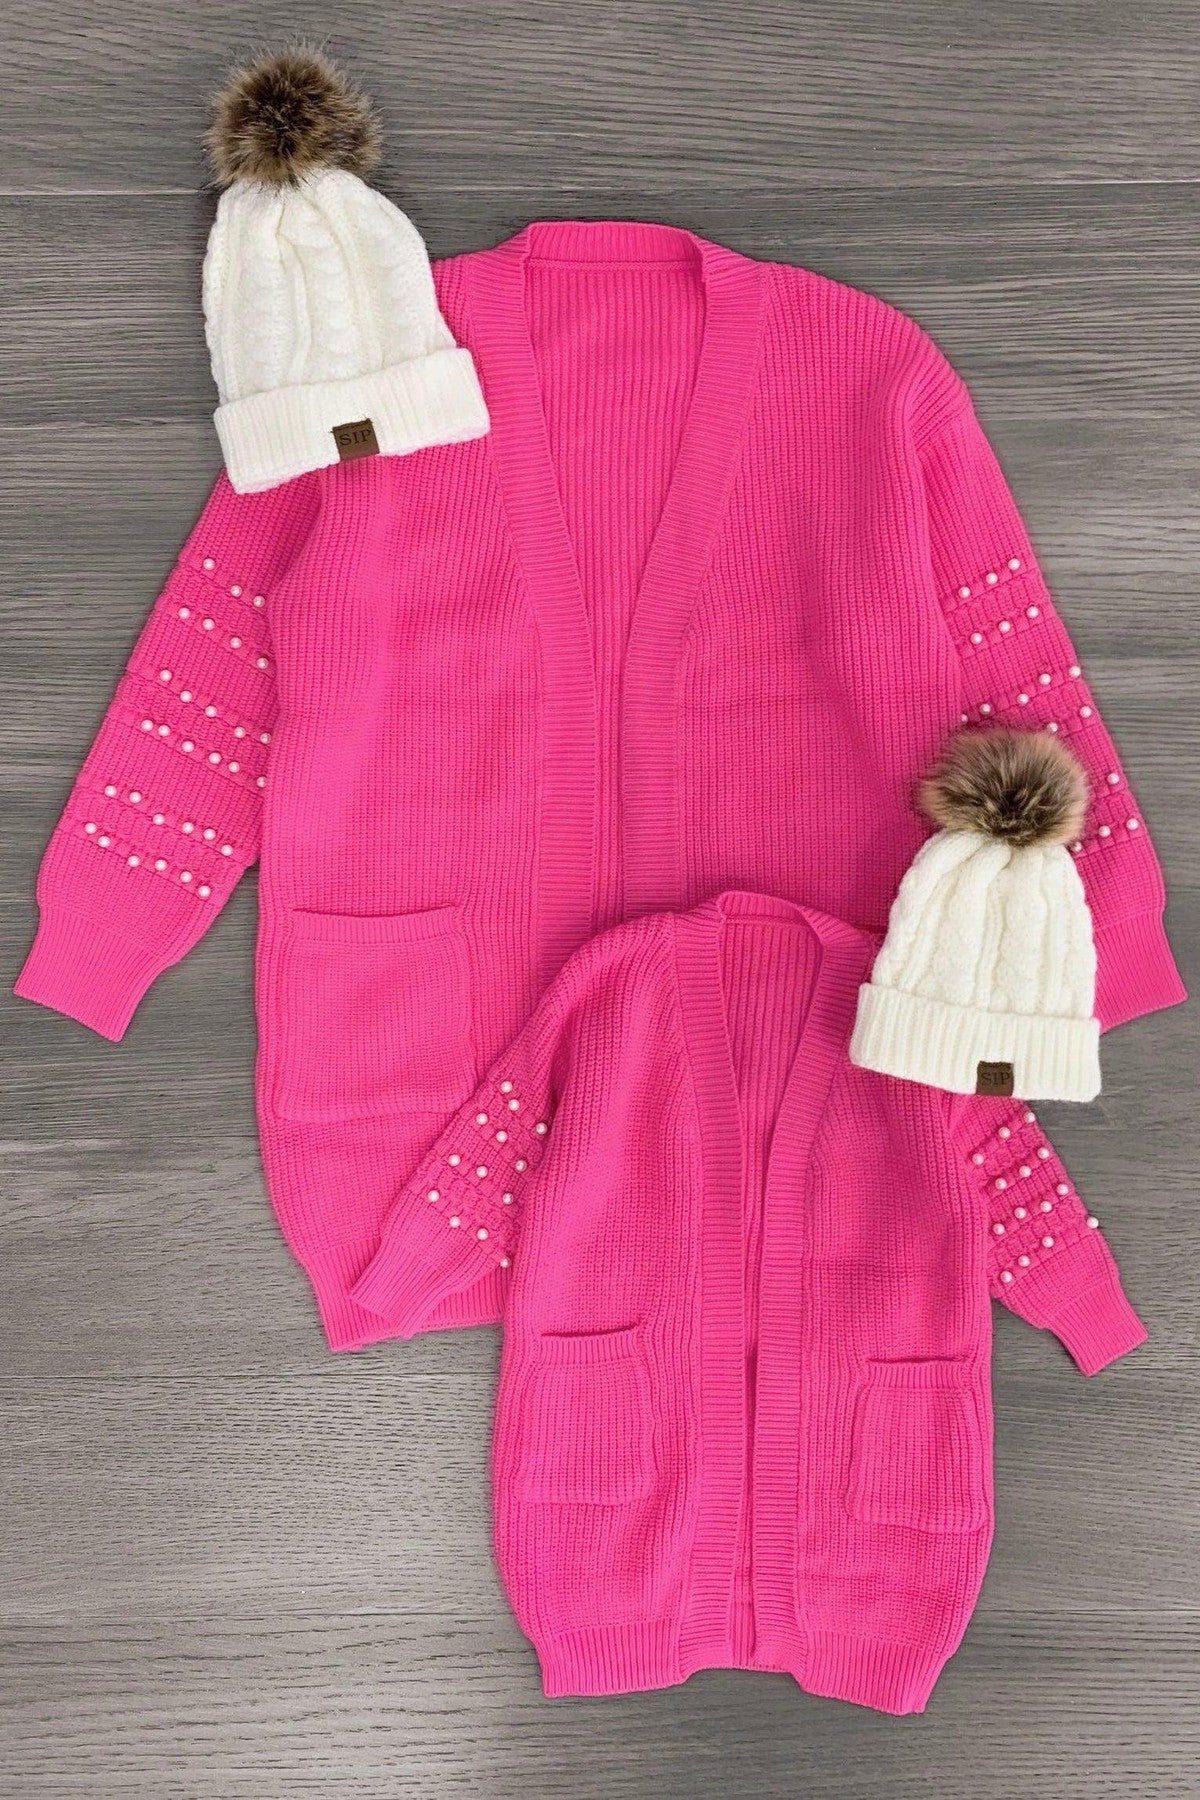 Kids Fall Outfits : Fun Fashions for Girls : Sparkle in Pink – Page 37